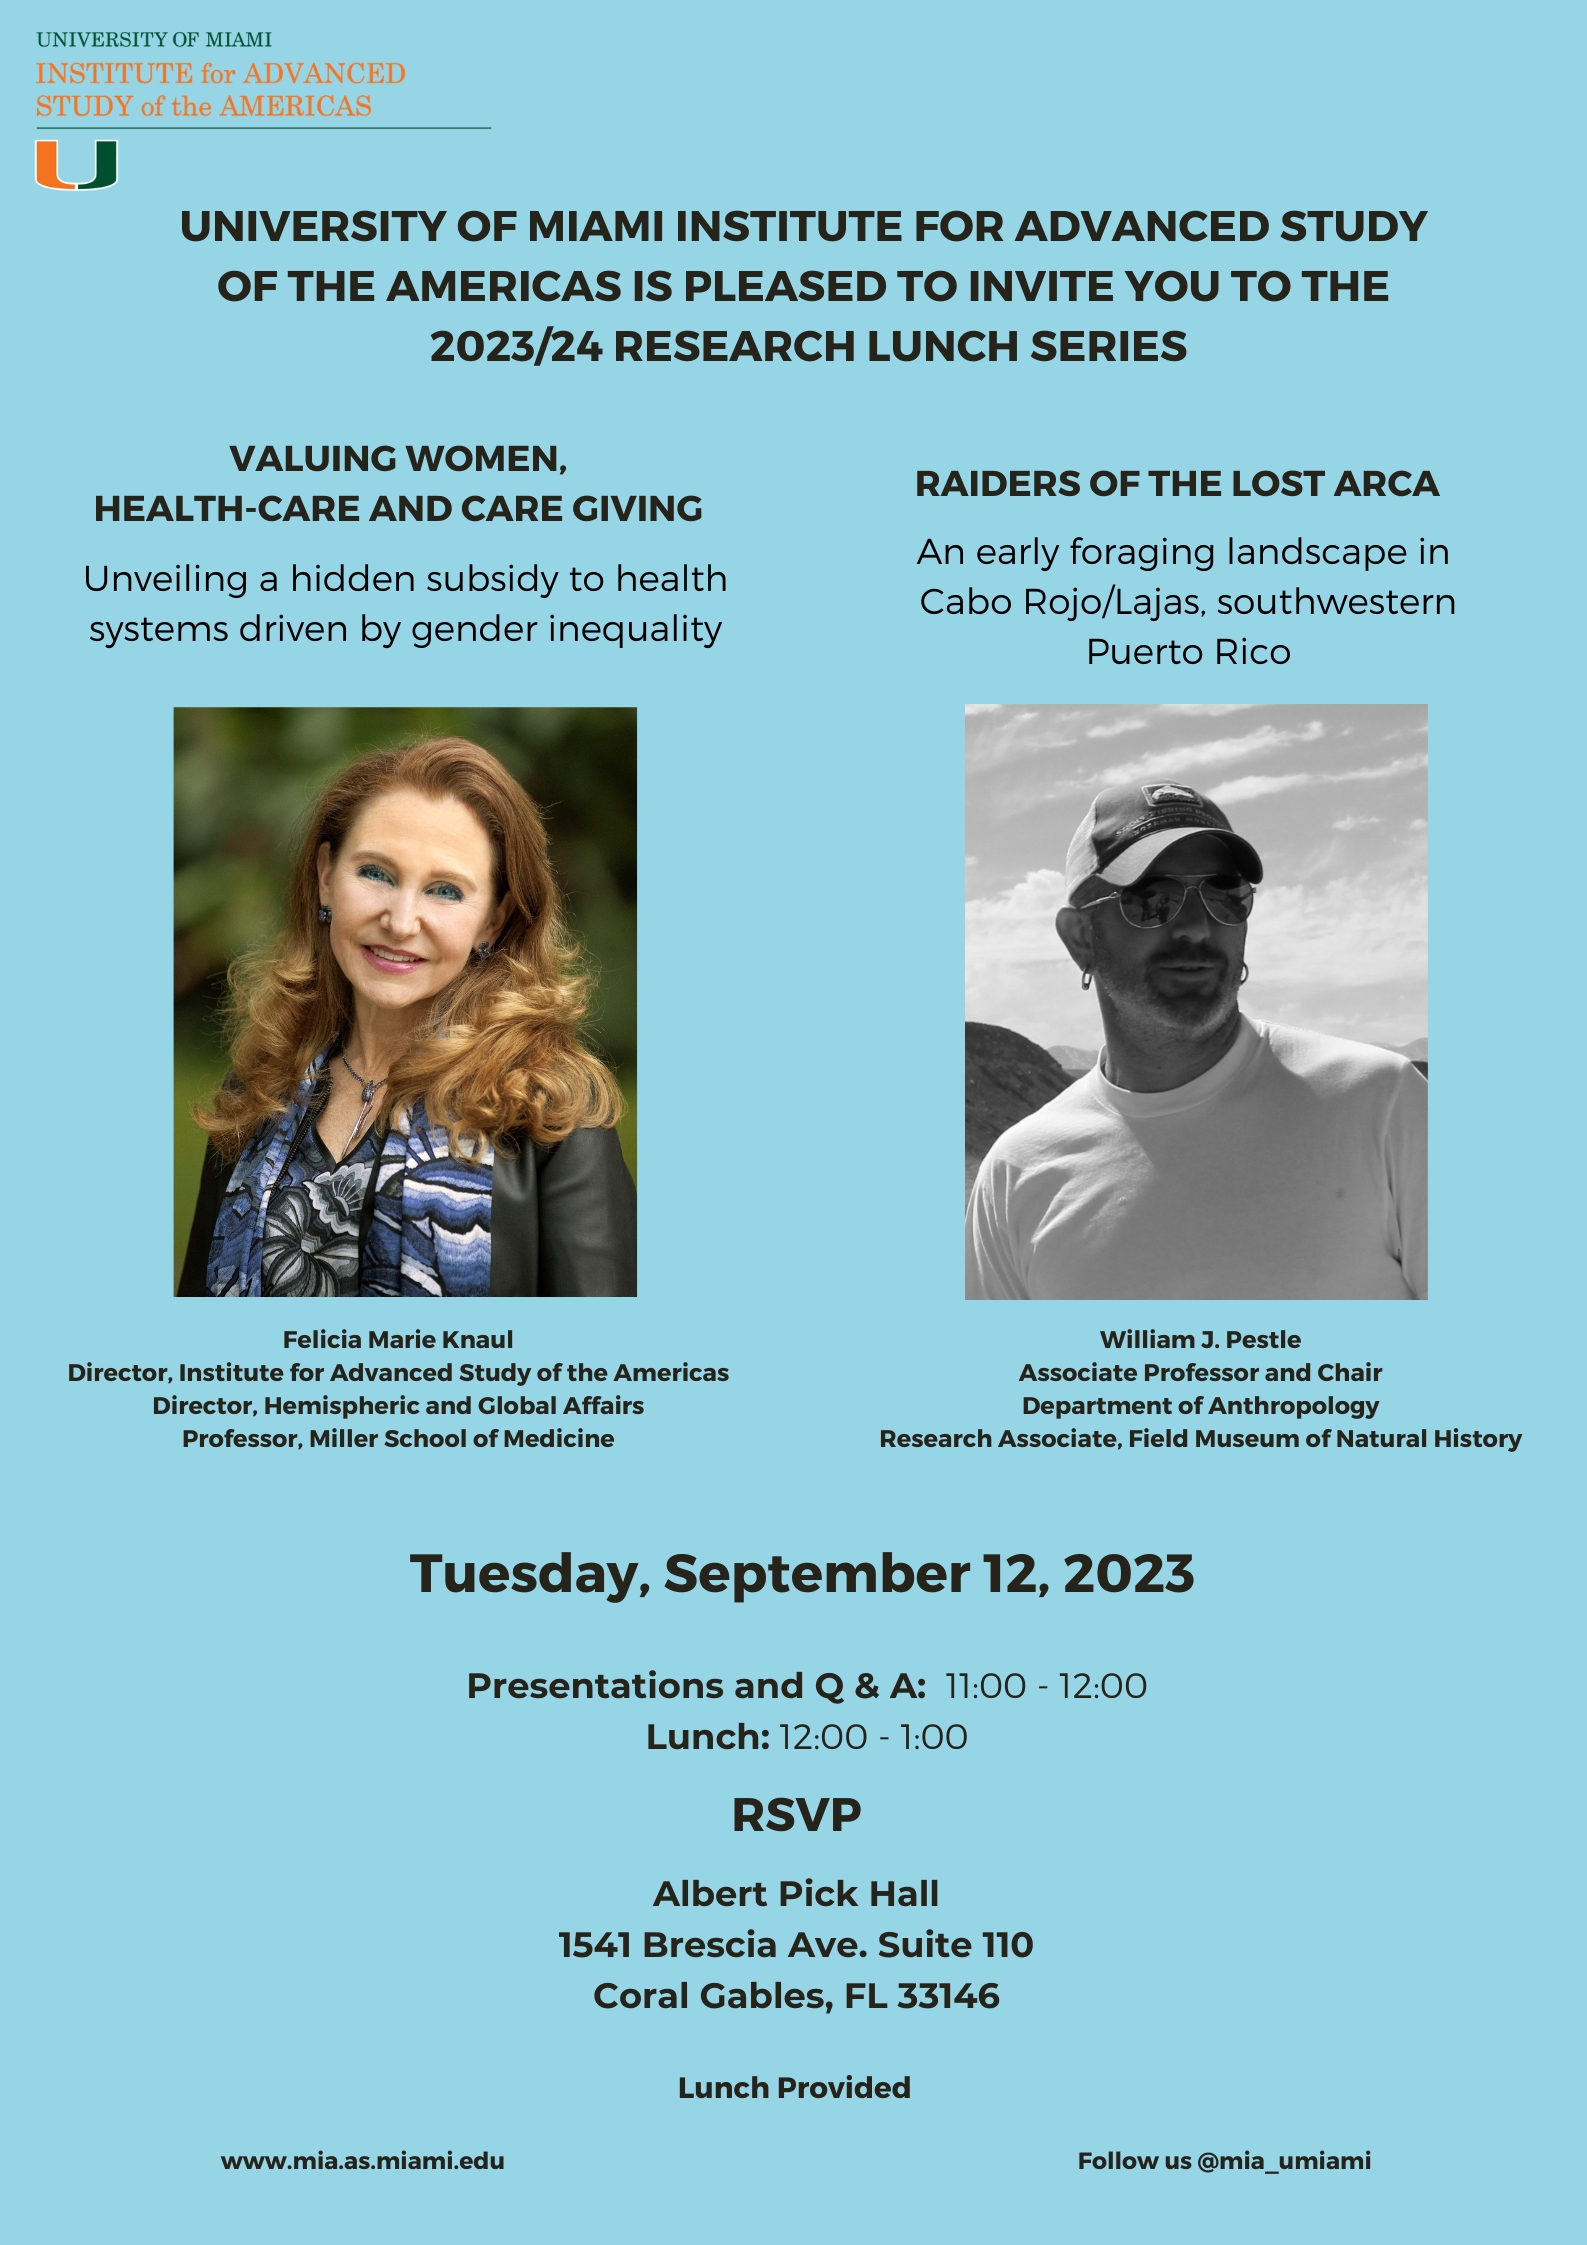 Research Lunch Series with Profs. Knaul and Pestle